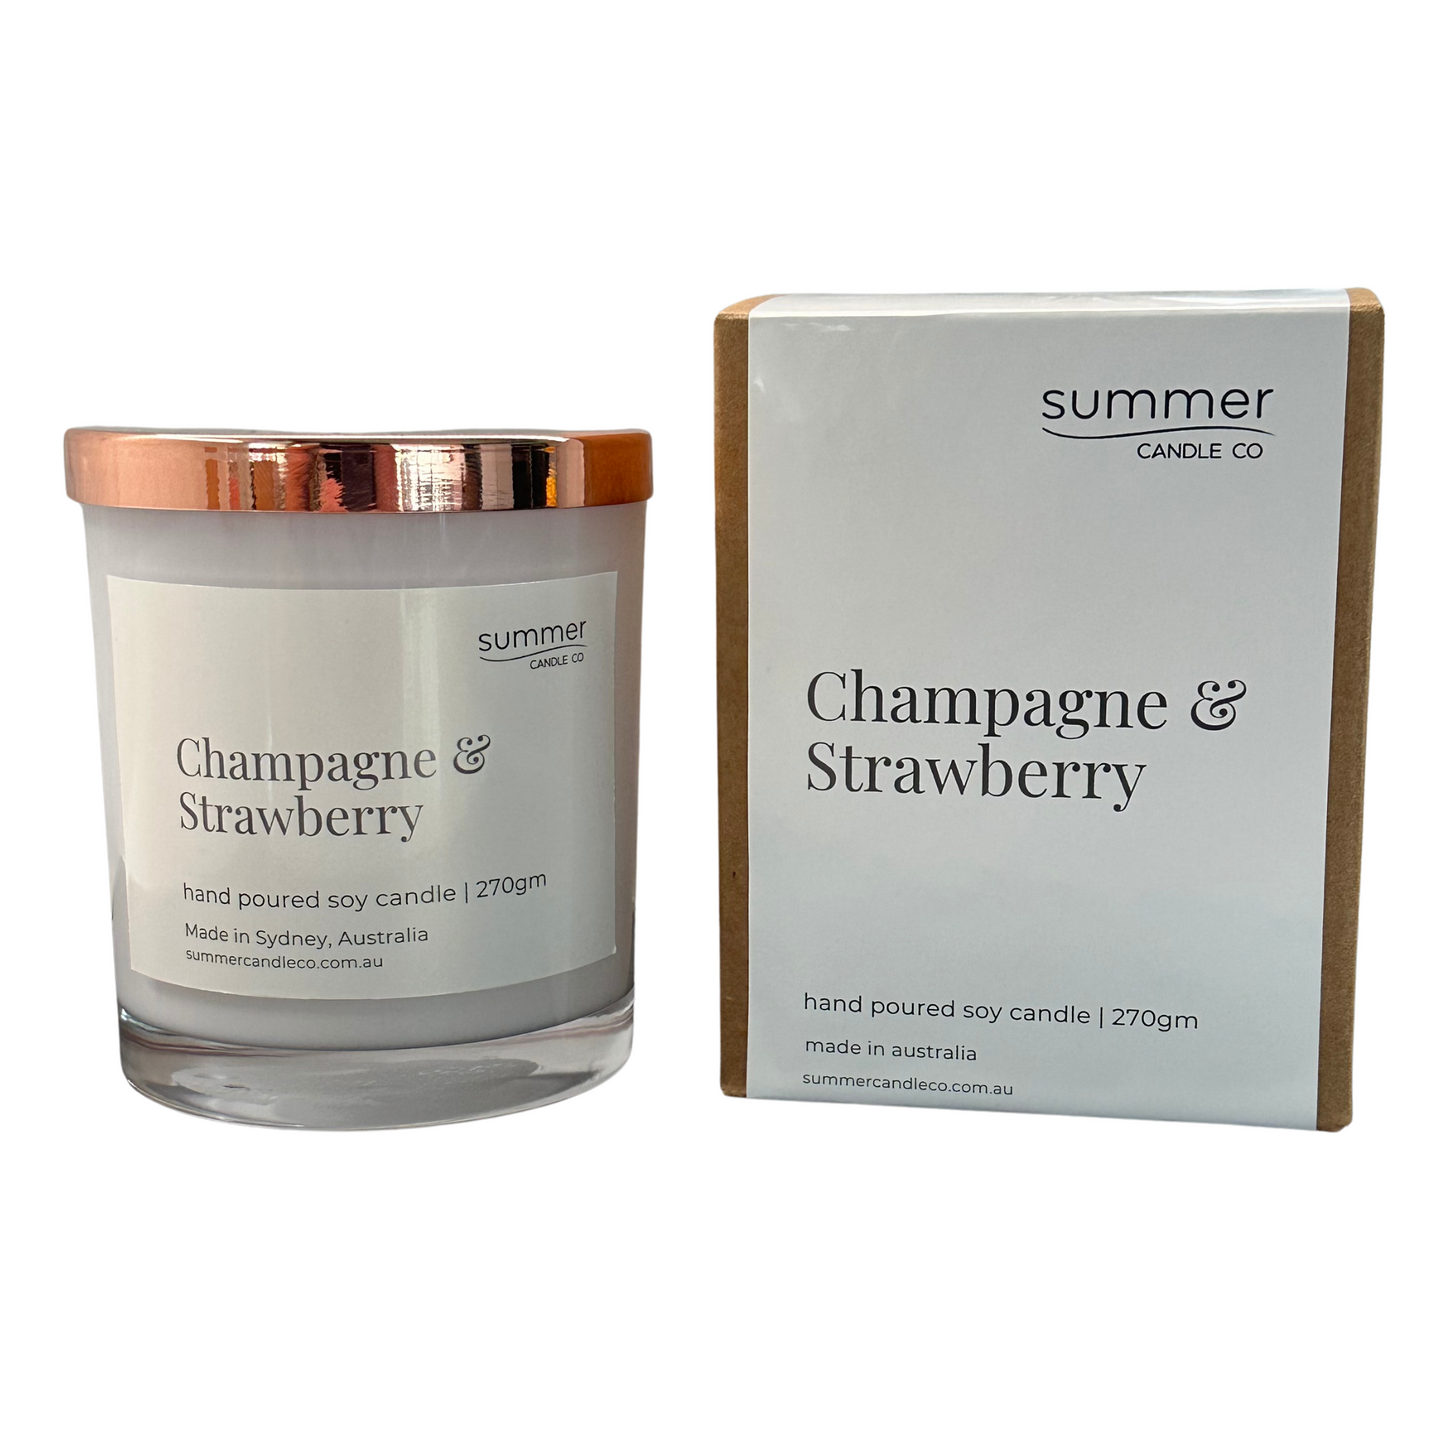 Lovely Hand Poured Soy Candle 270gram Fragrance of Champagne & Strawberry and Gift Box